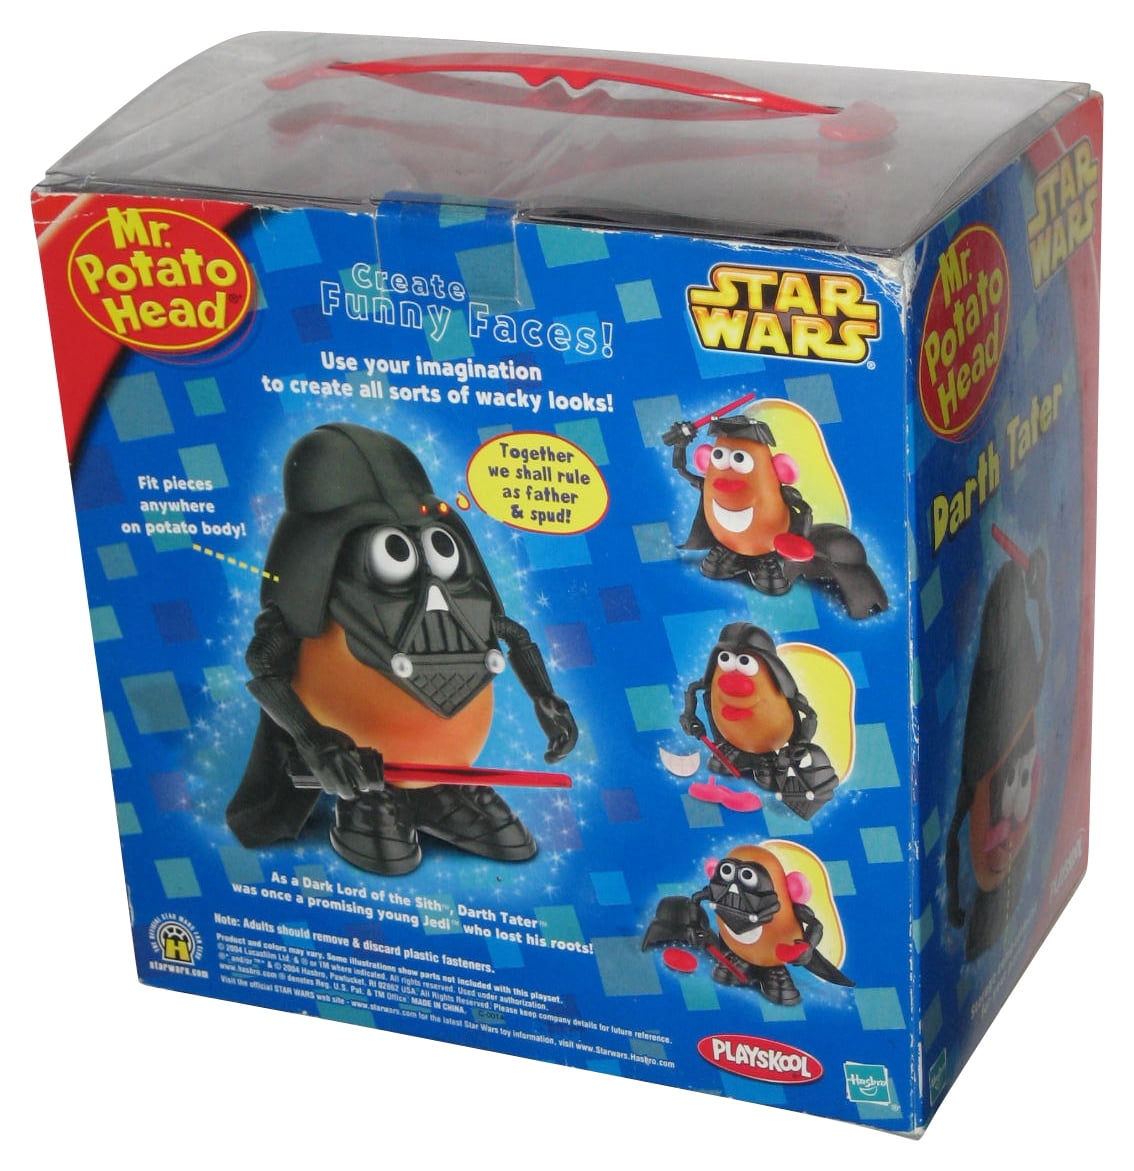 Darth Tater 18 PC Container Playset Hasbro Mr Potato Head W/ Vader Outfit B319 for sale online 